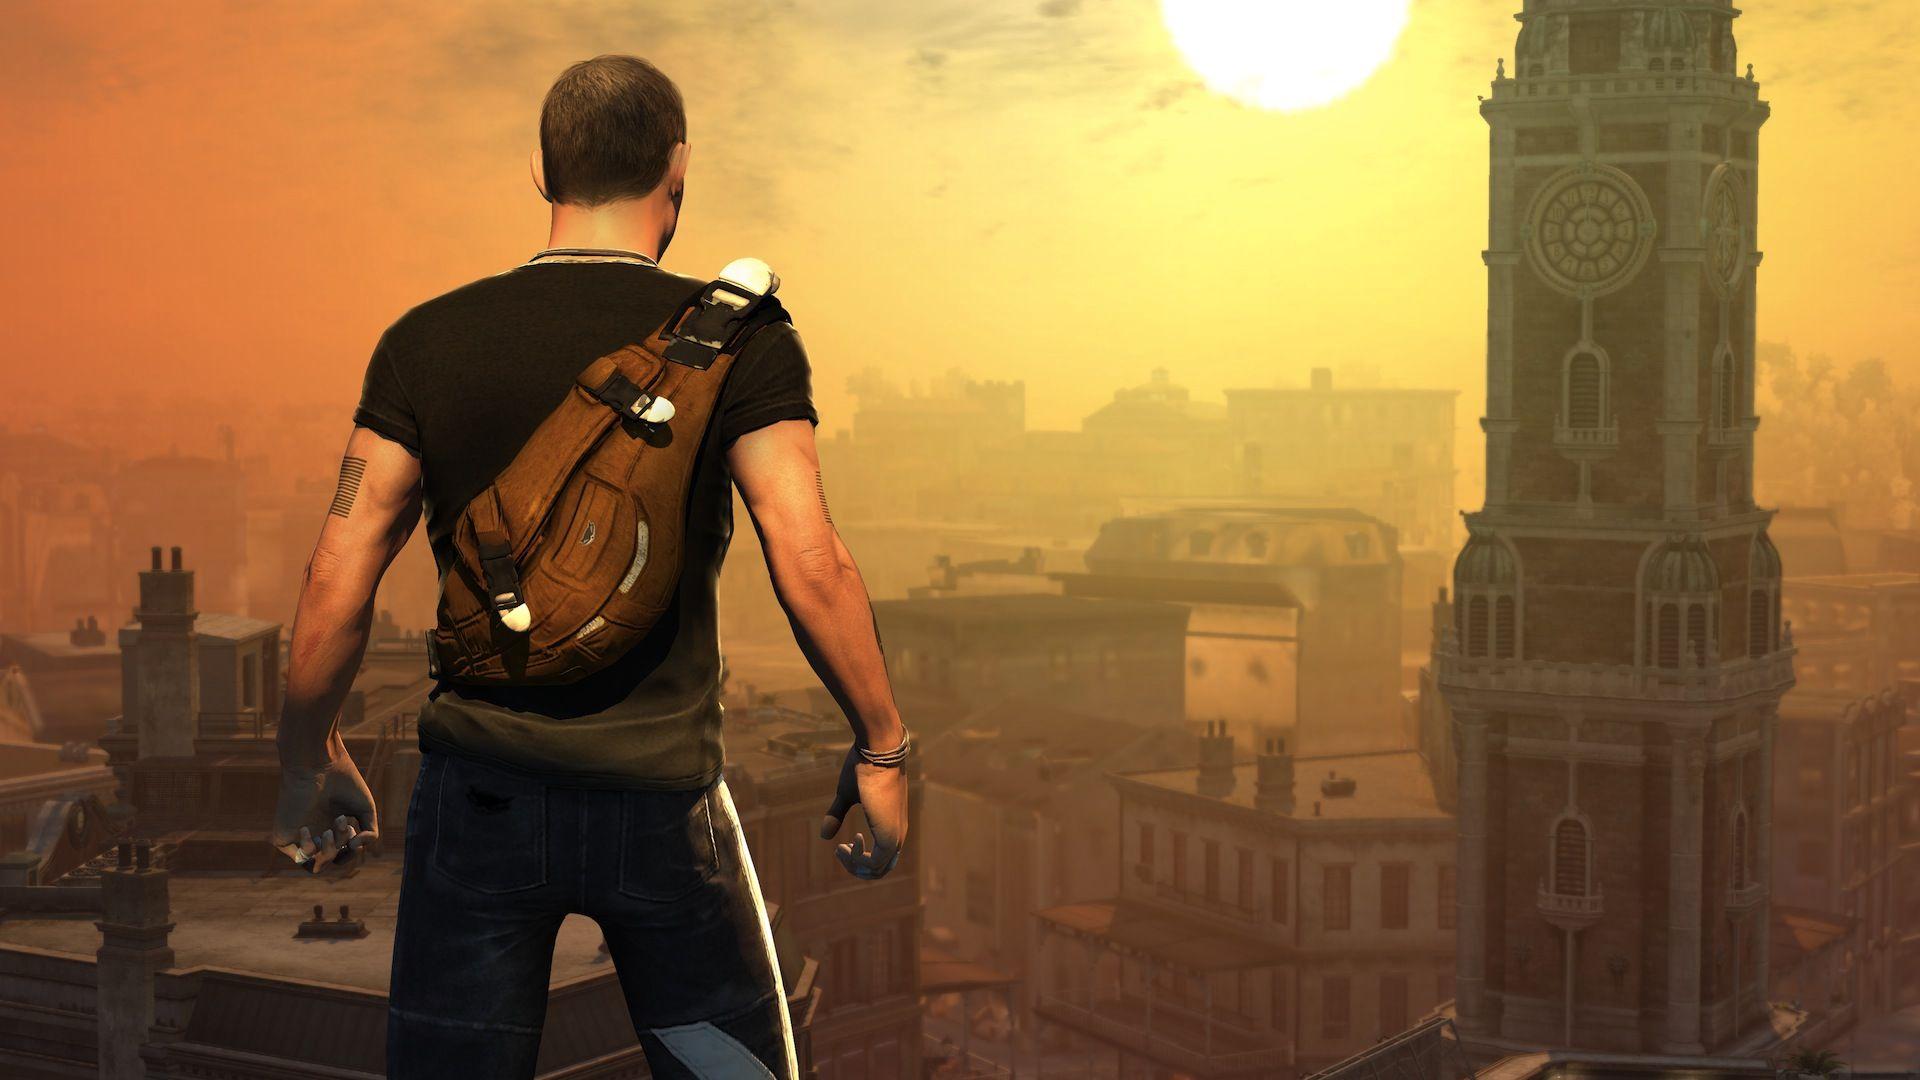 New inFamous 2 Screens